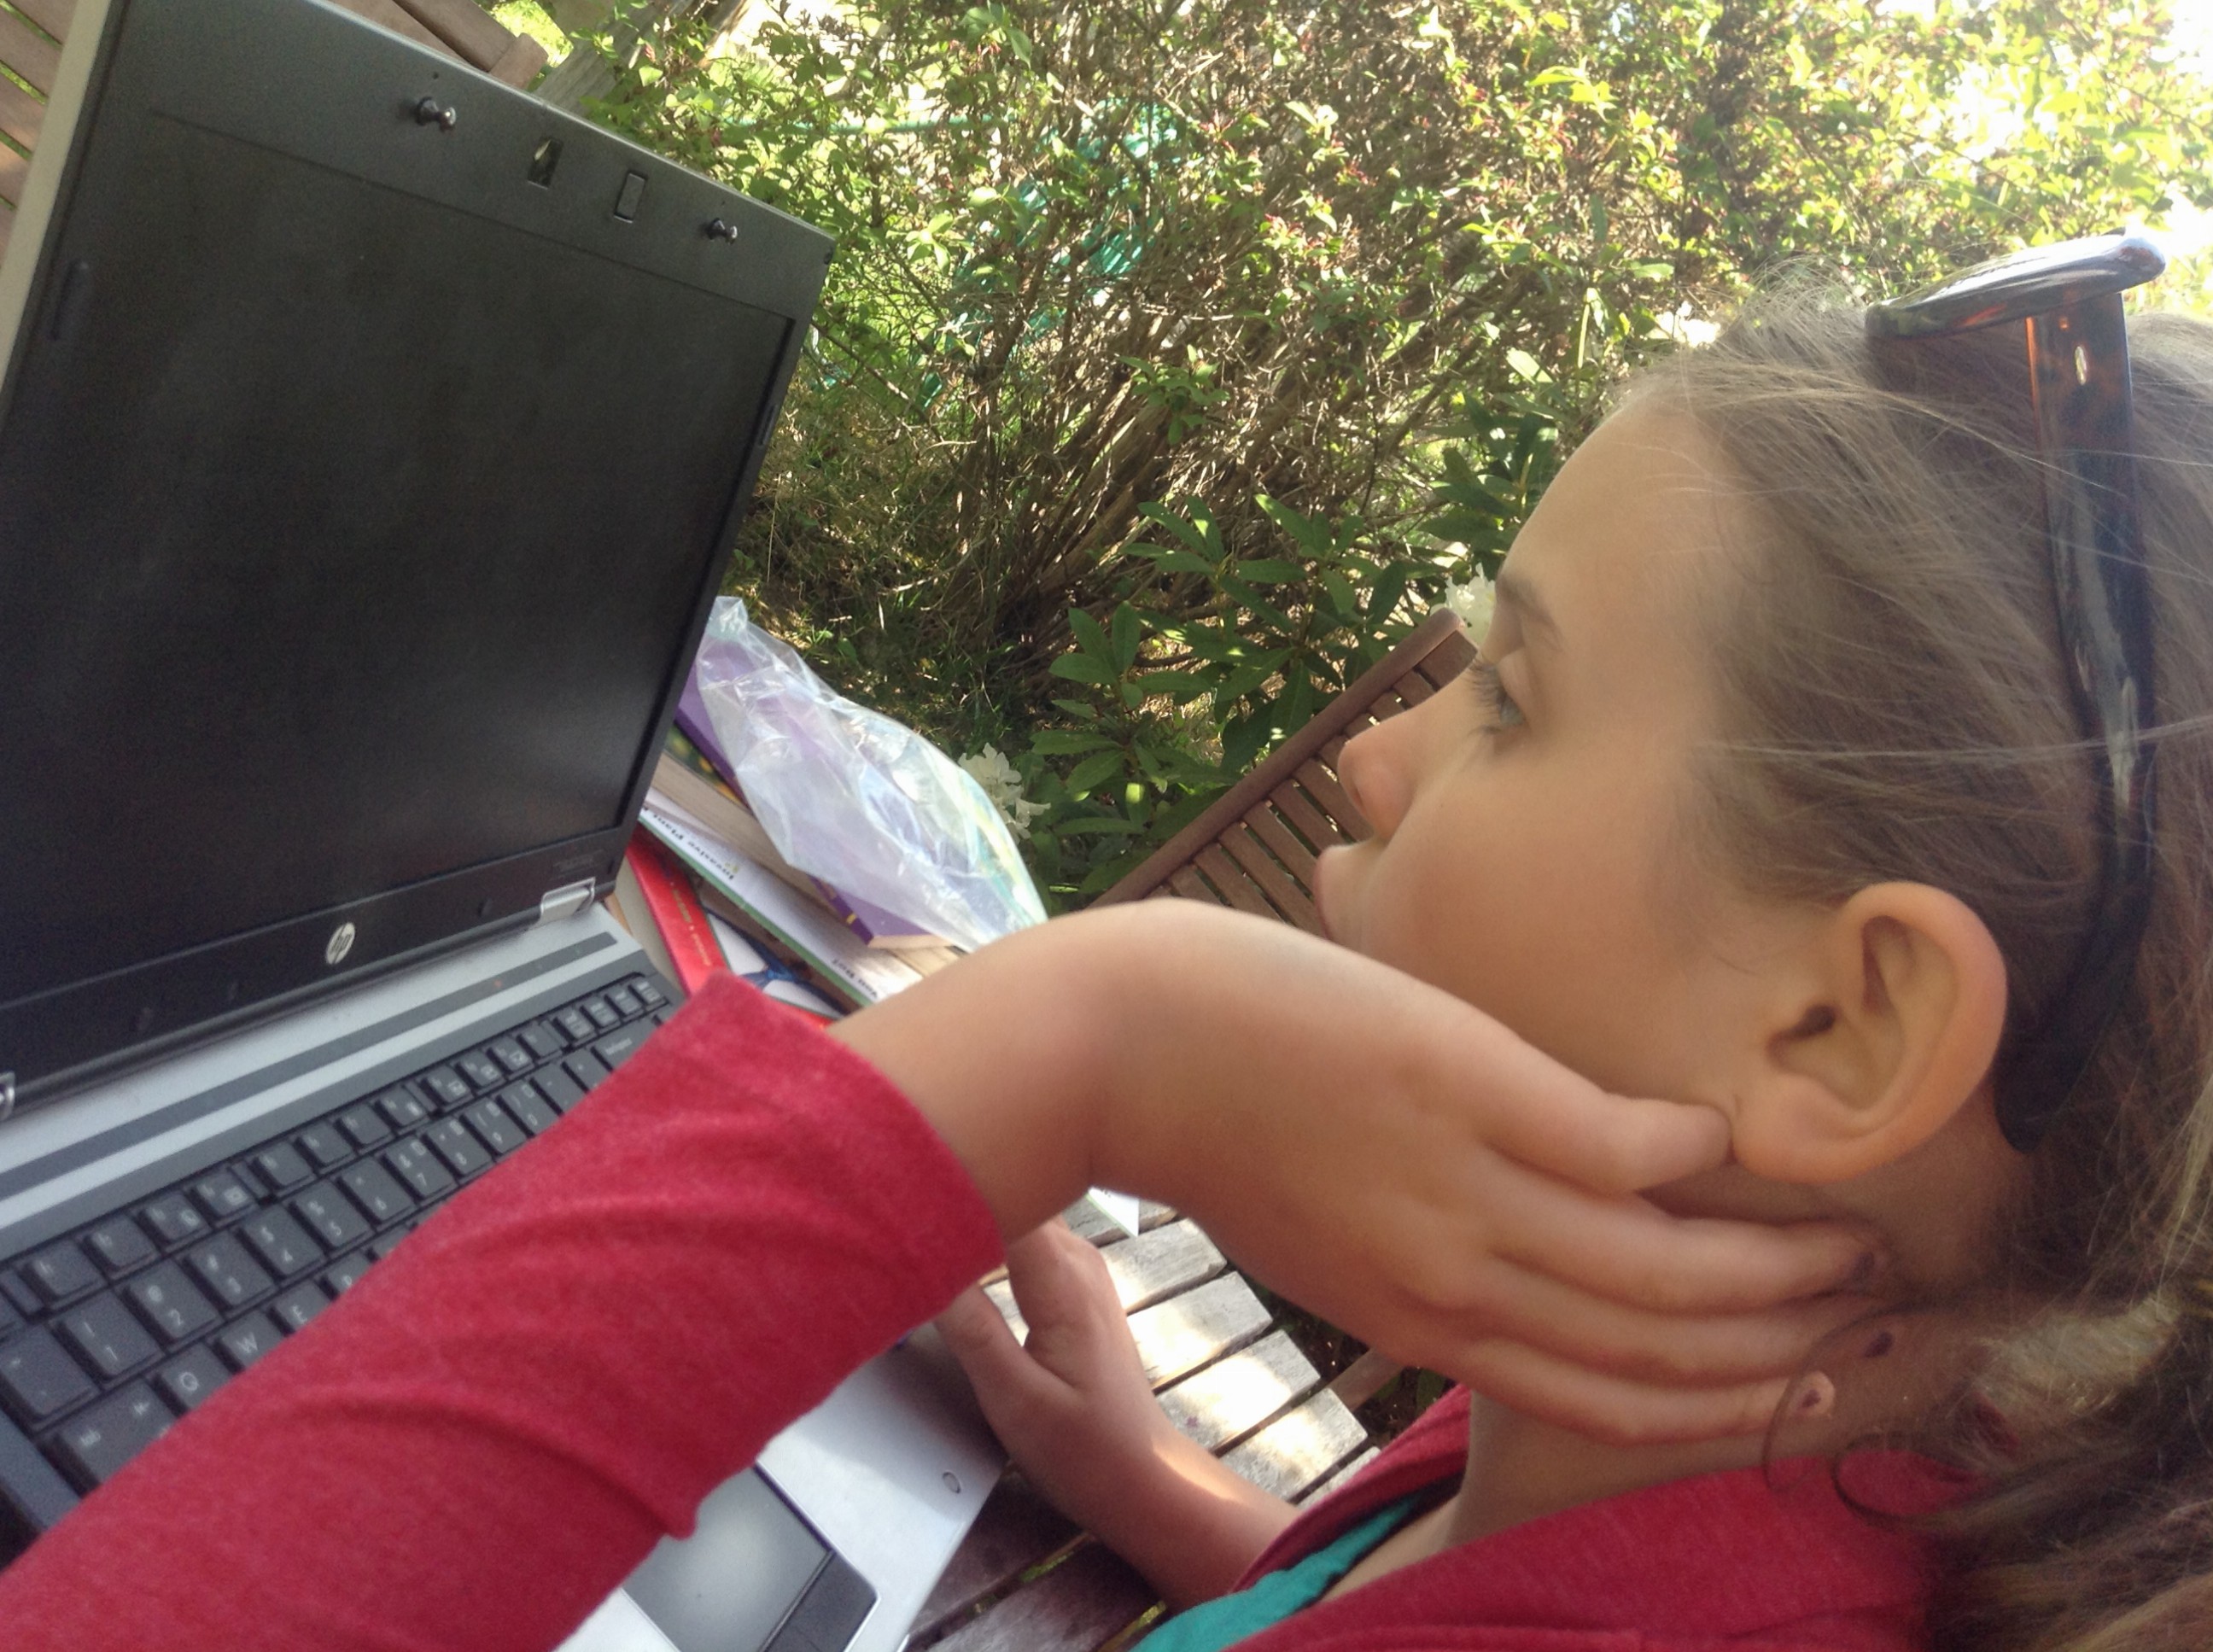 Madelyn on the computer in the garden